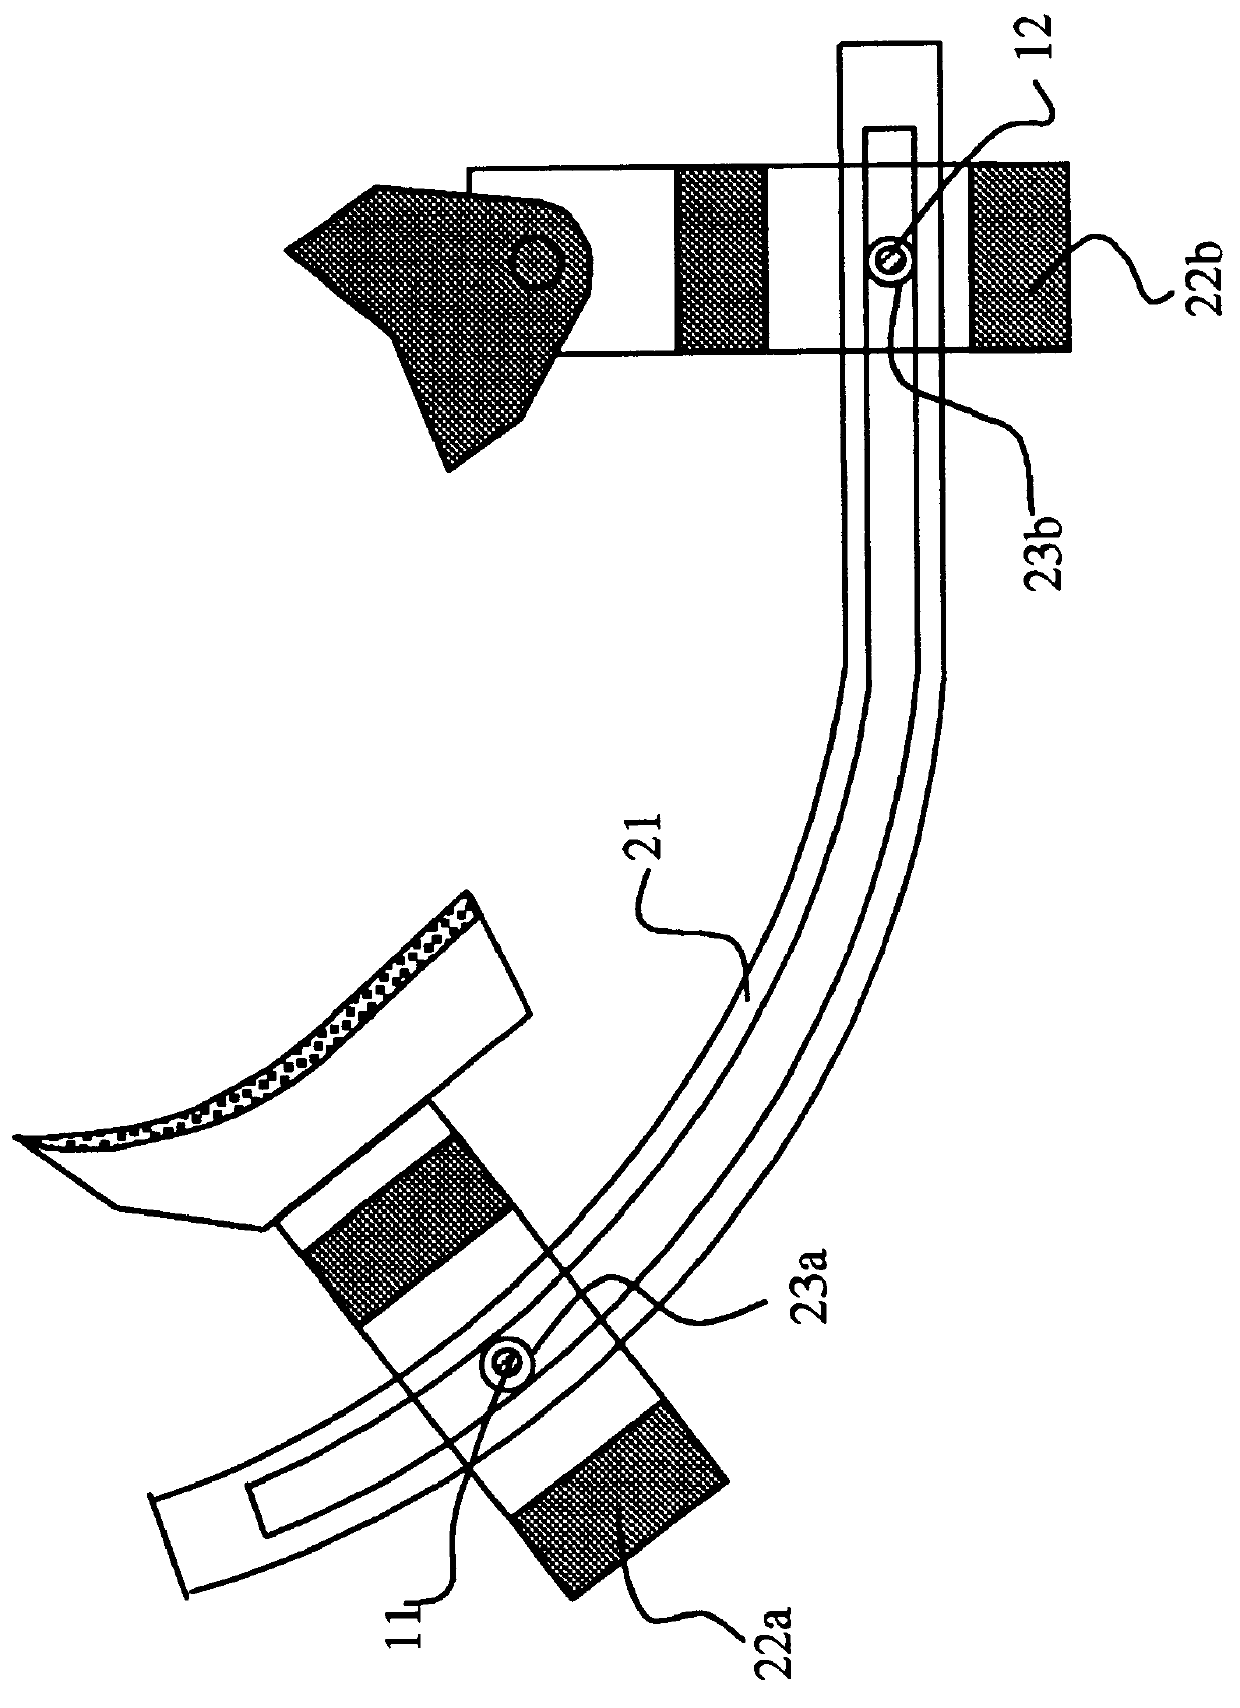 Apparatus and method for lobing and thermal-damage control in shoe centerless grinding